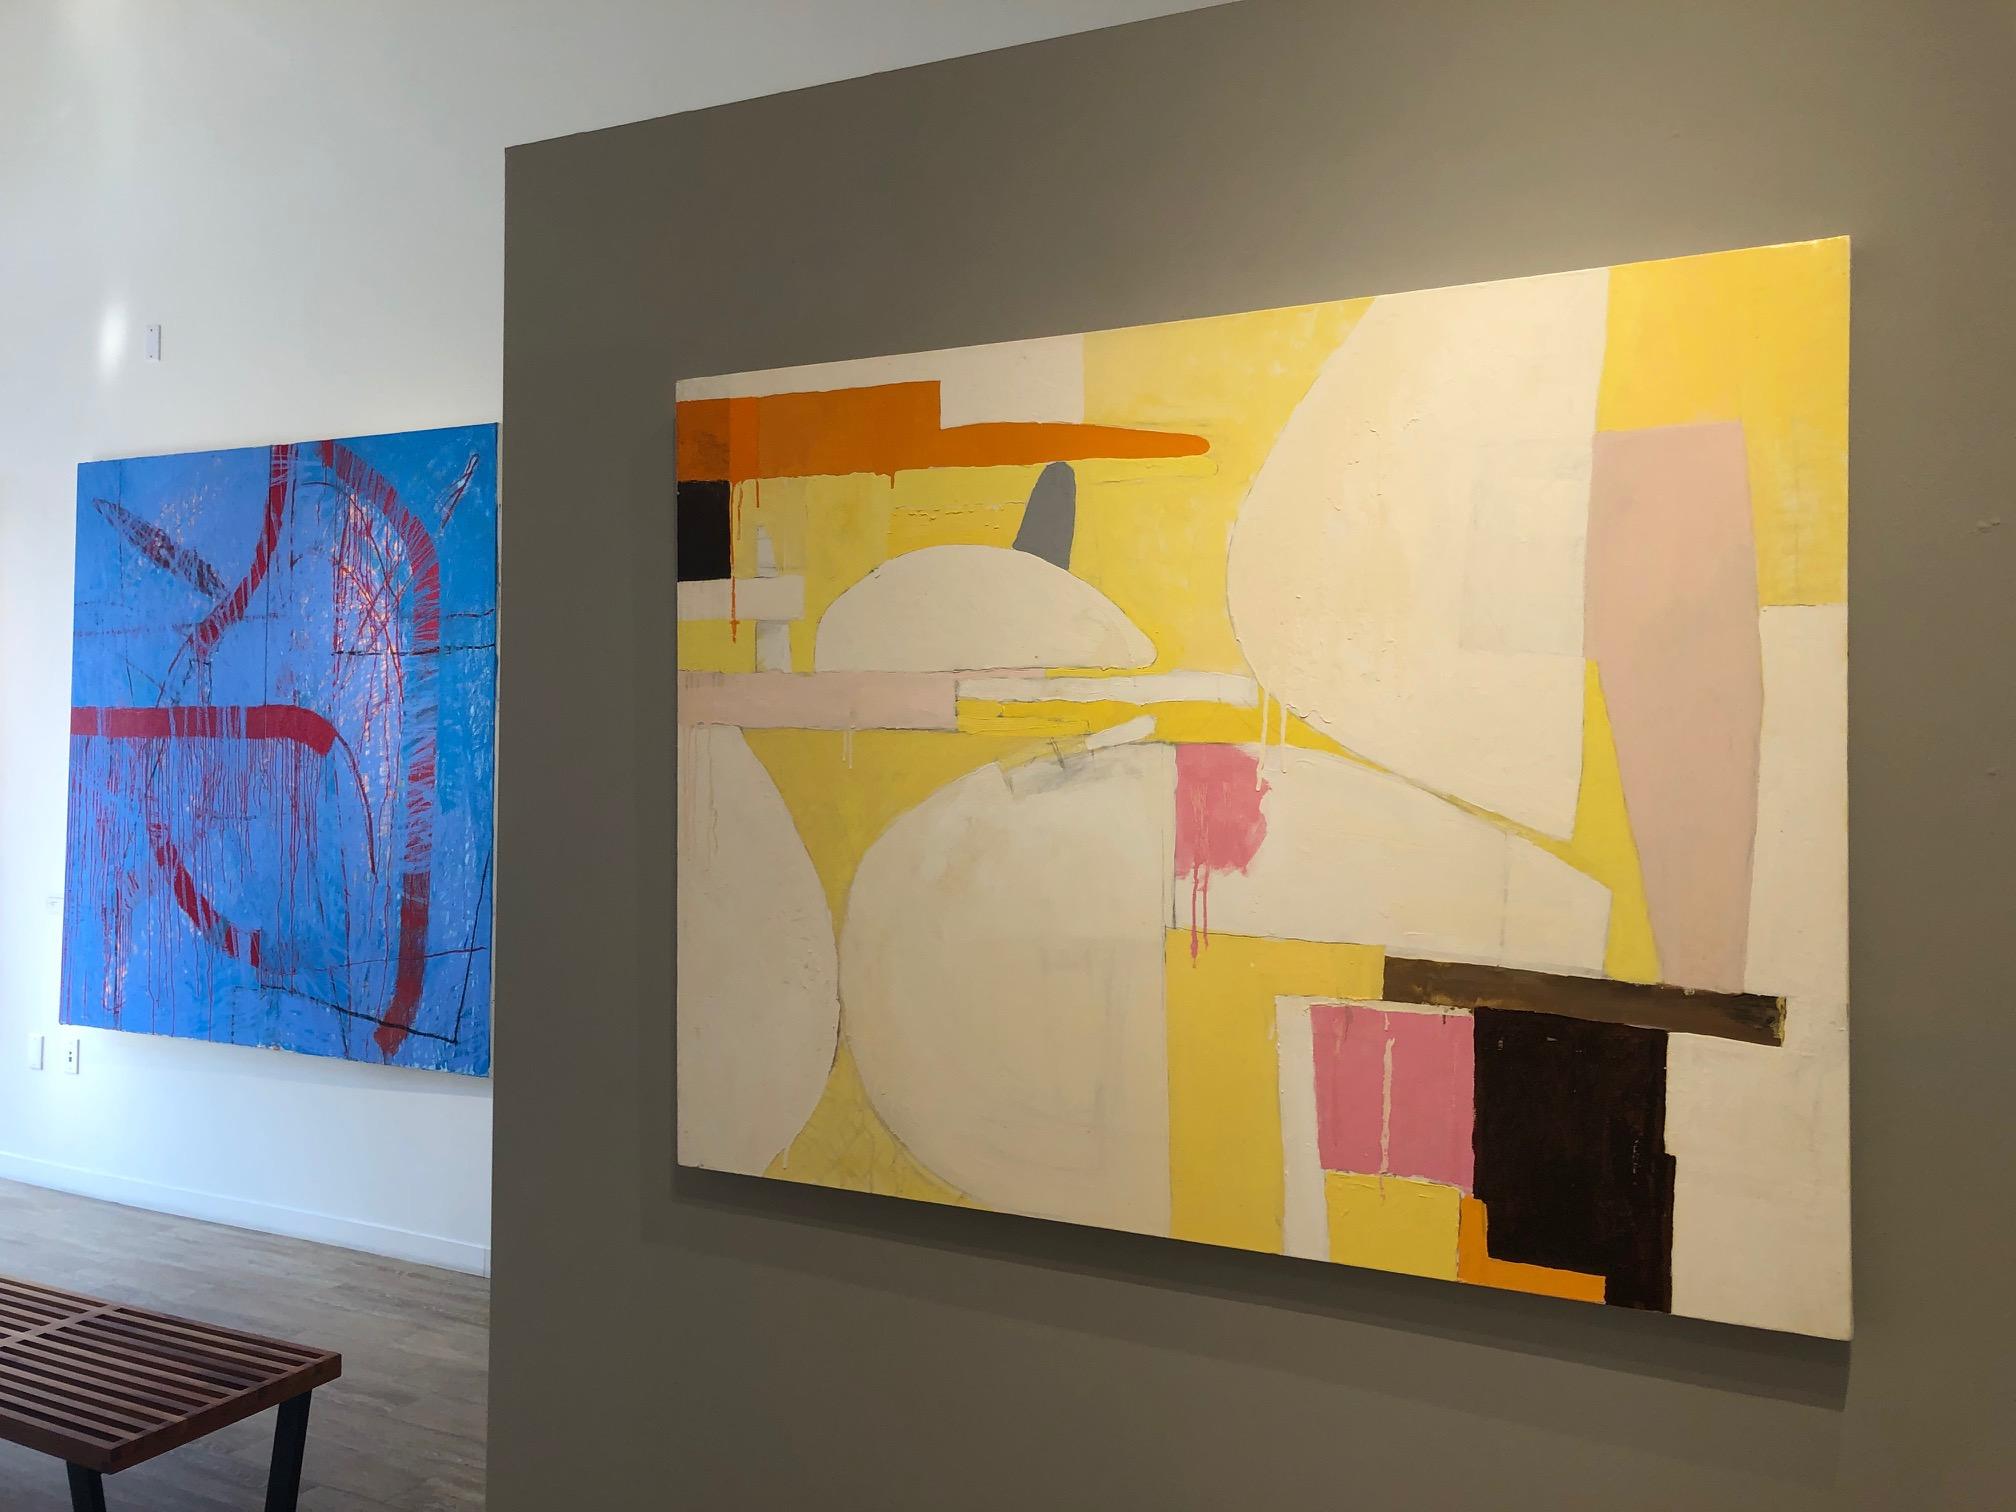 Still Life / abstract expressionistic geometry in soft yellow - Painting by Javier Arizmendi-Kalb